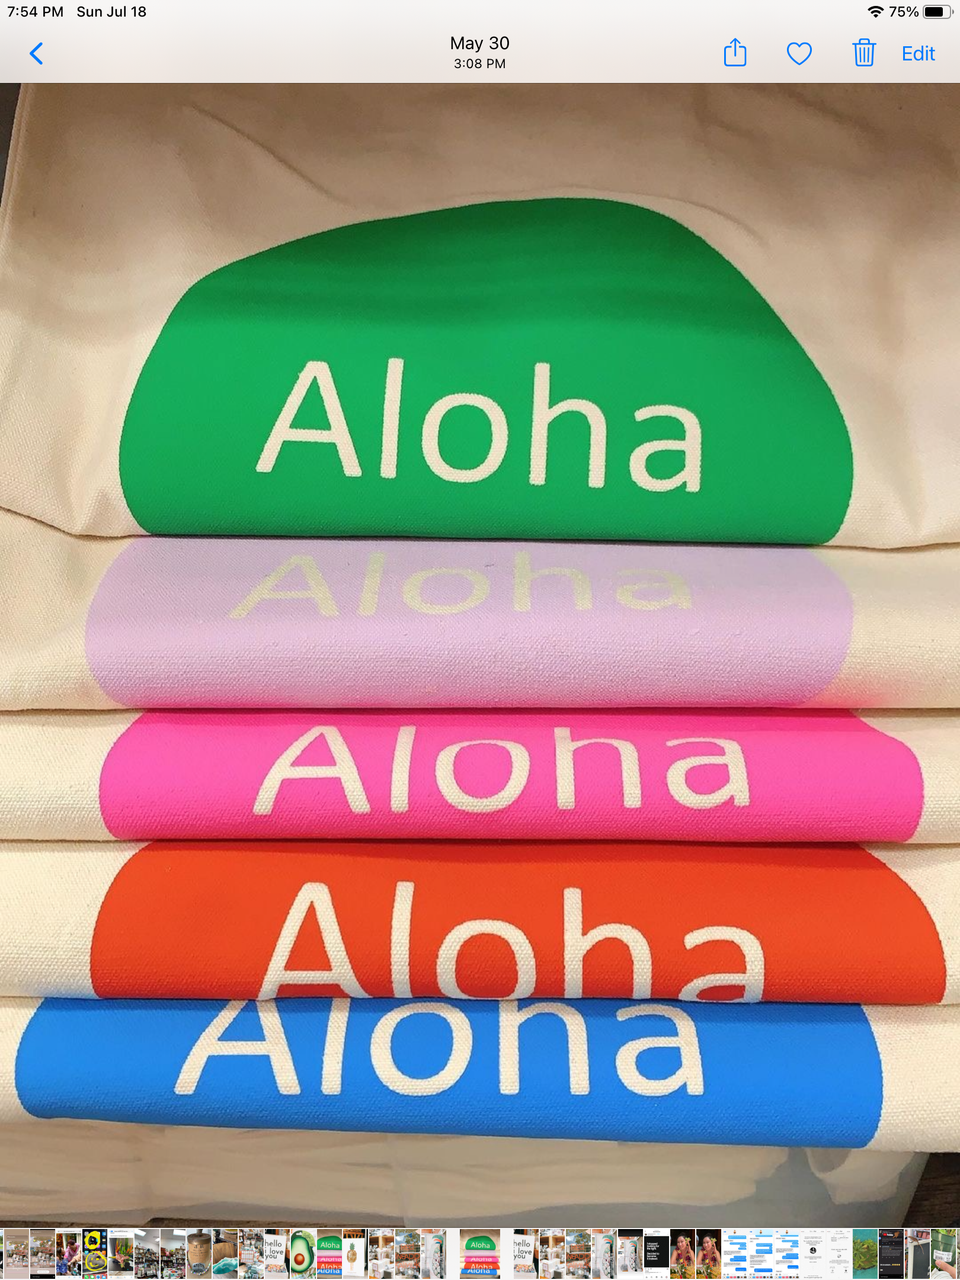 folded totes on shelf all different colors they all say aloha in the center. blue and orange pink lavender and green options.